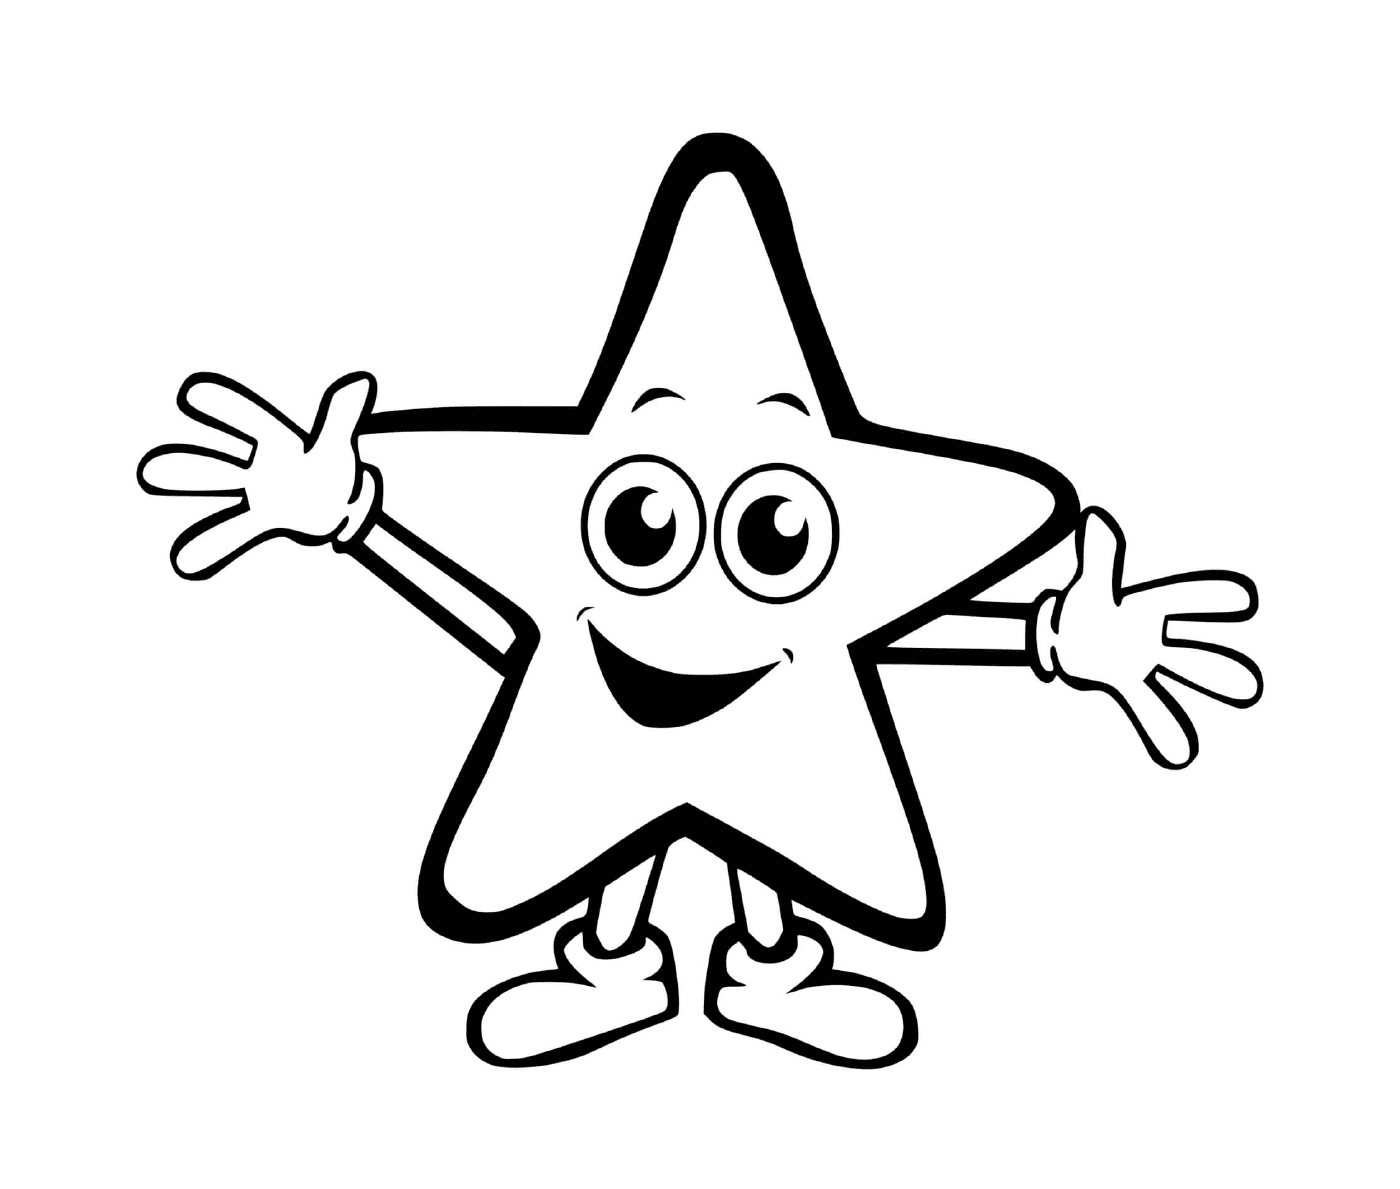  A joyous star with hands and feet 